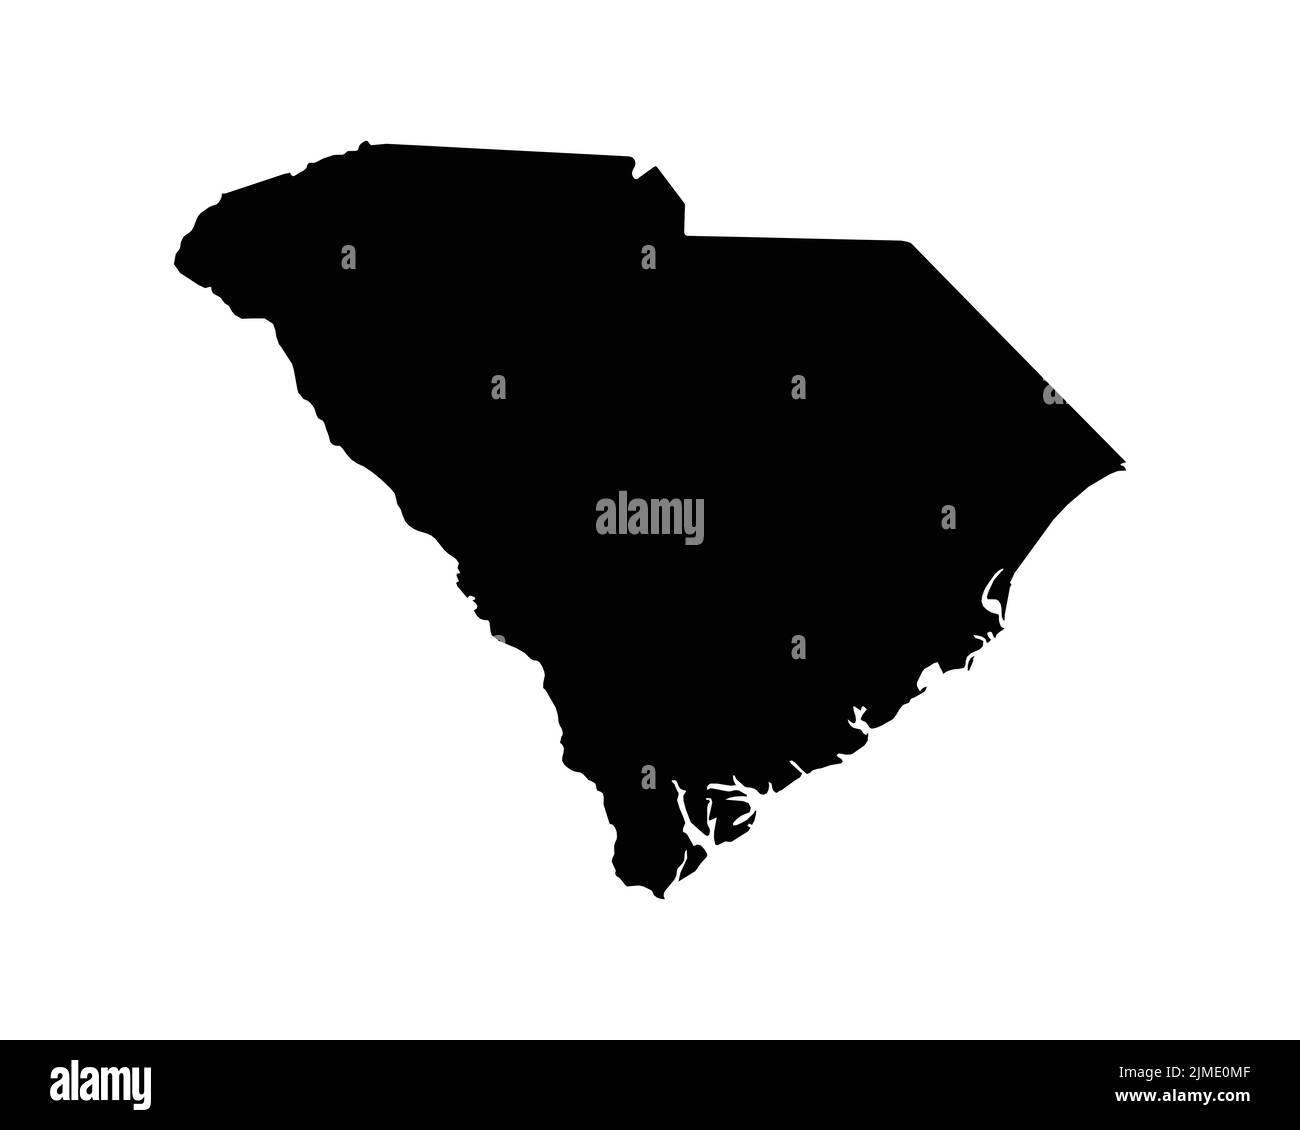 South Carolina US Map. SC USA State Map. Black and White South Carolinian State Border Boundary Line Outline Geography Territory Shape Vector Illustra Stock Vector